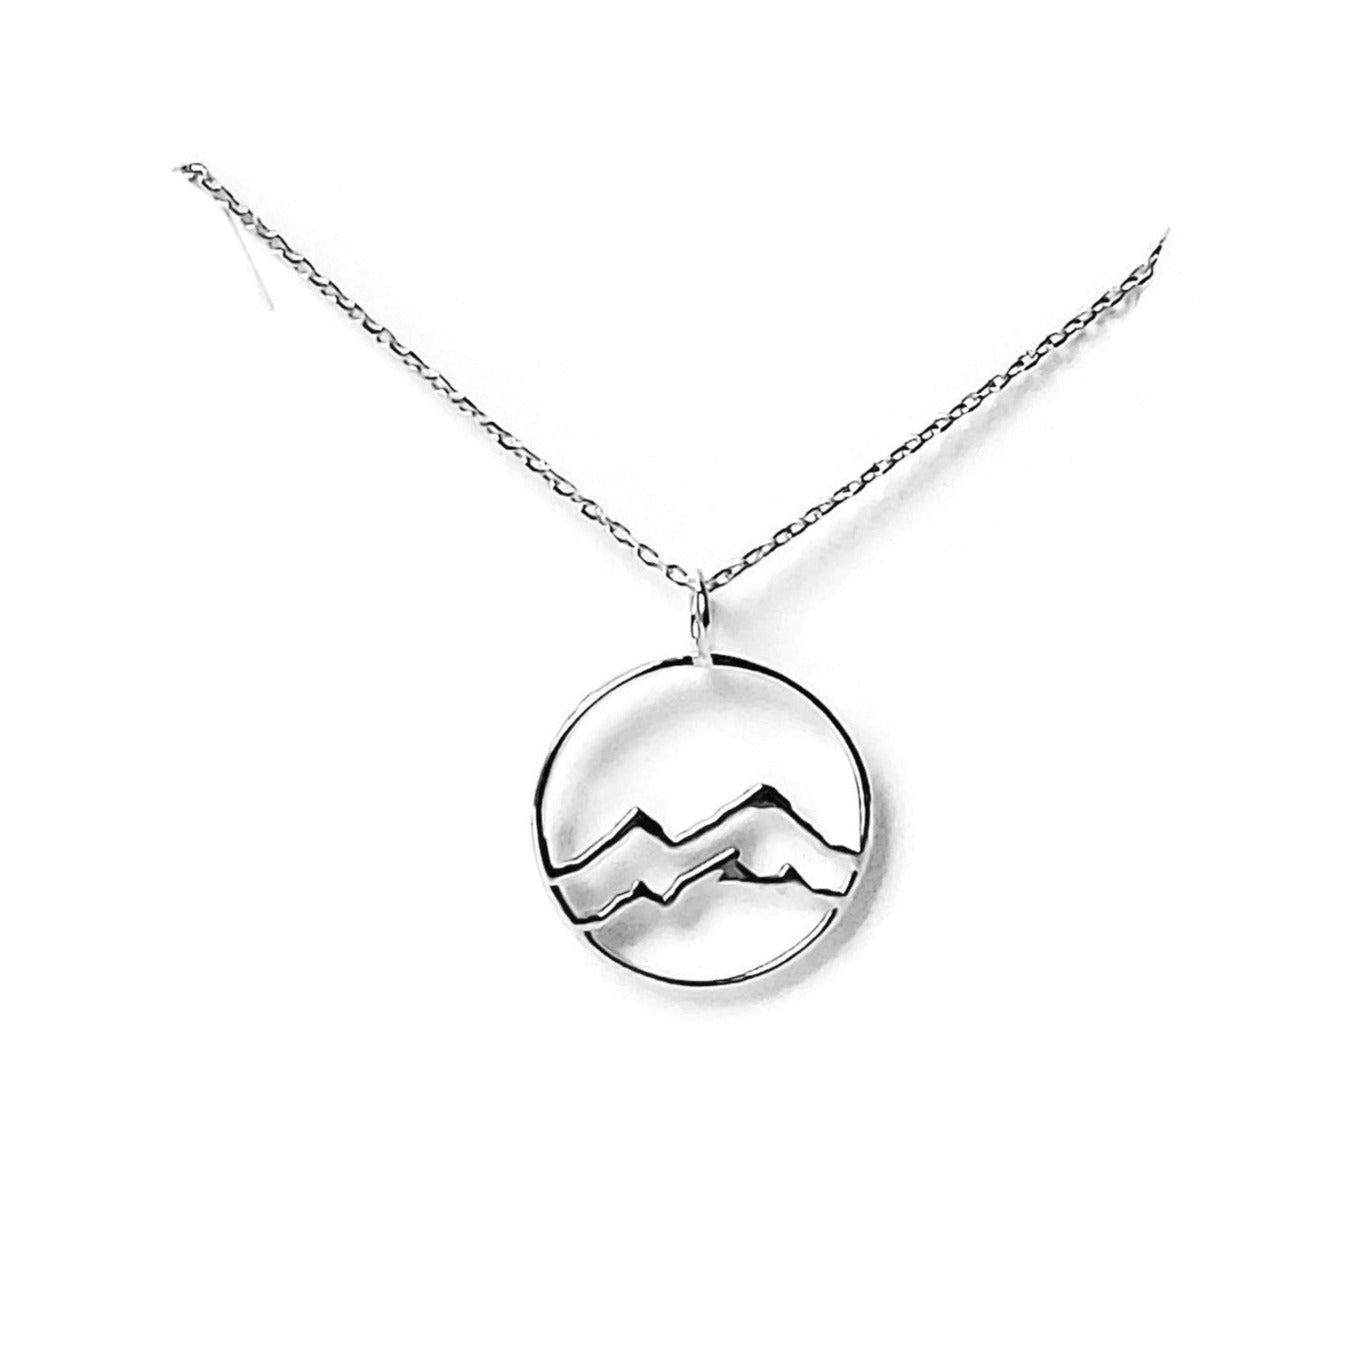 rhodium plated sterling silver little coast mountain circle pendant necklace on white background